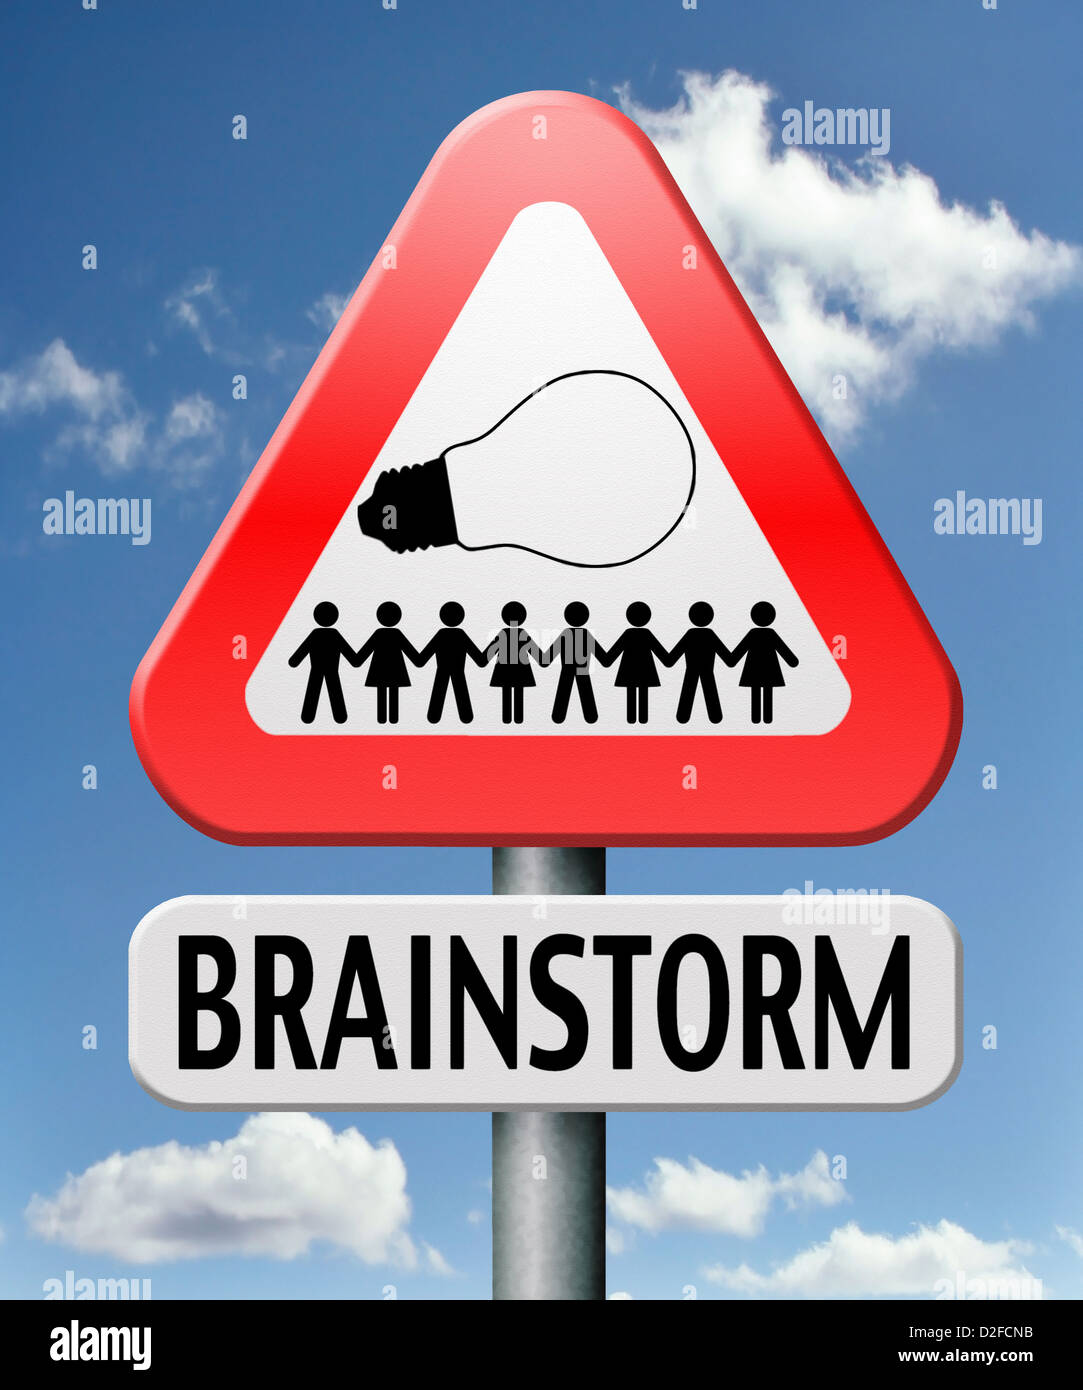 Brainstorm teamwork to create new idea or solution team brainstorming search innovation and inspiration Stock Photo